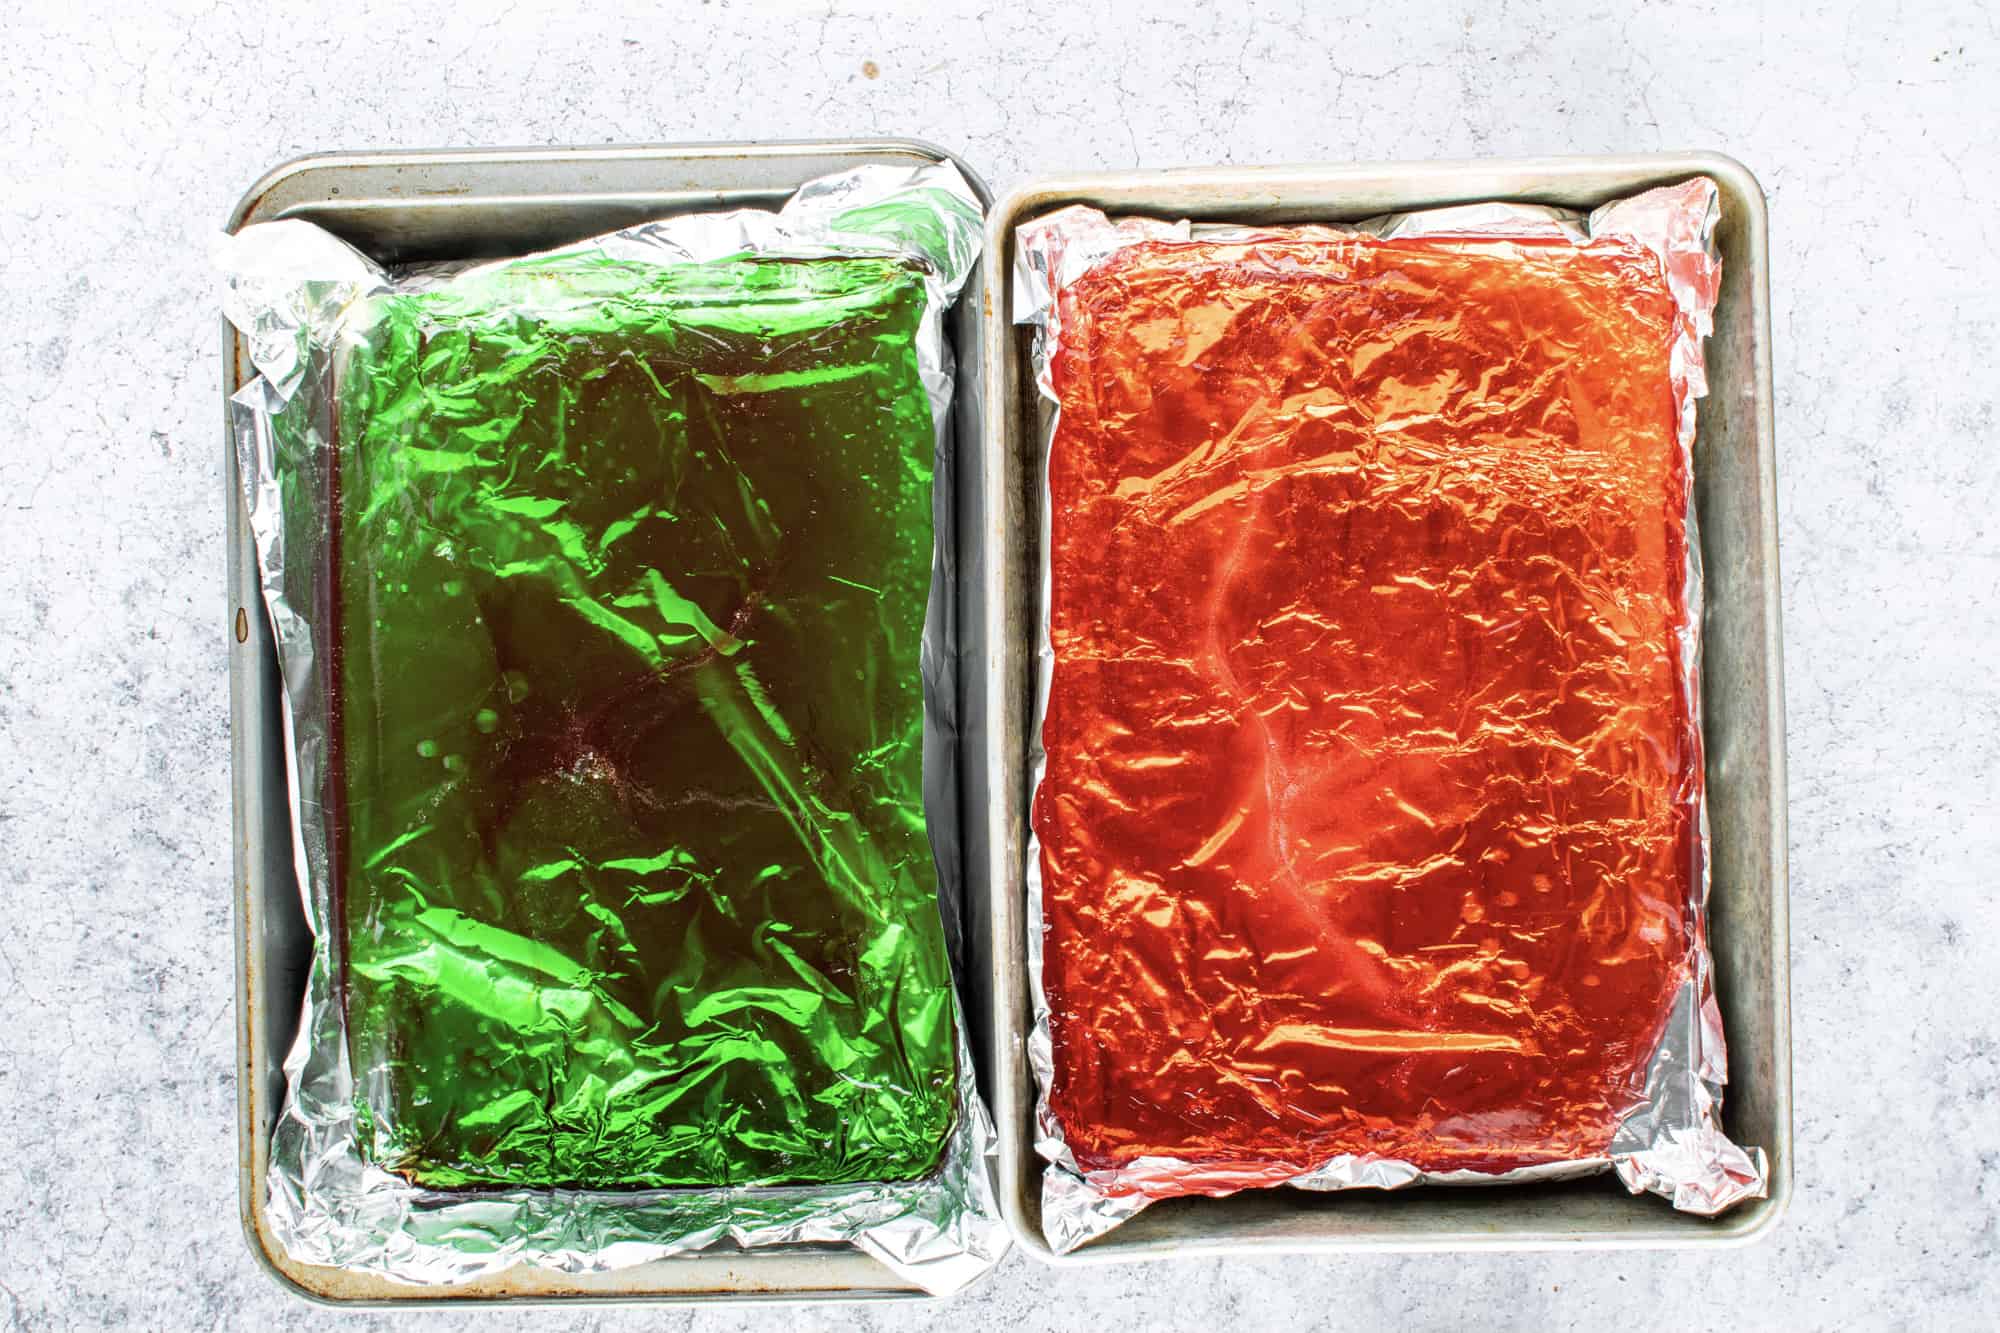 red and green liquid rock candy poured into two separate pans lined with aluminum foil.